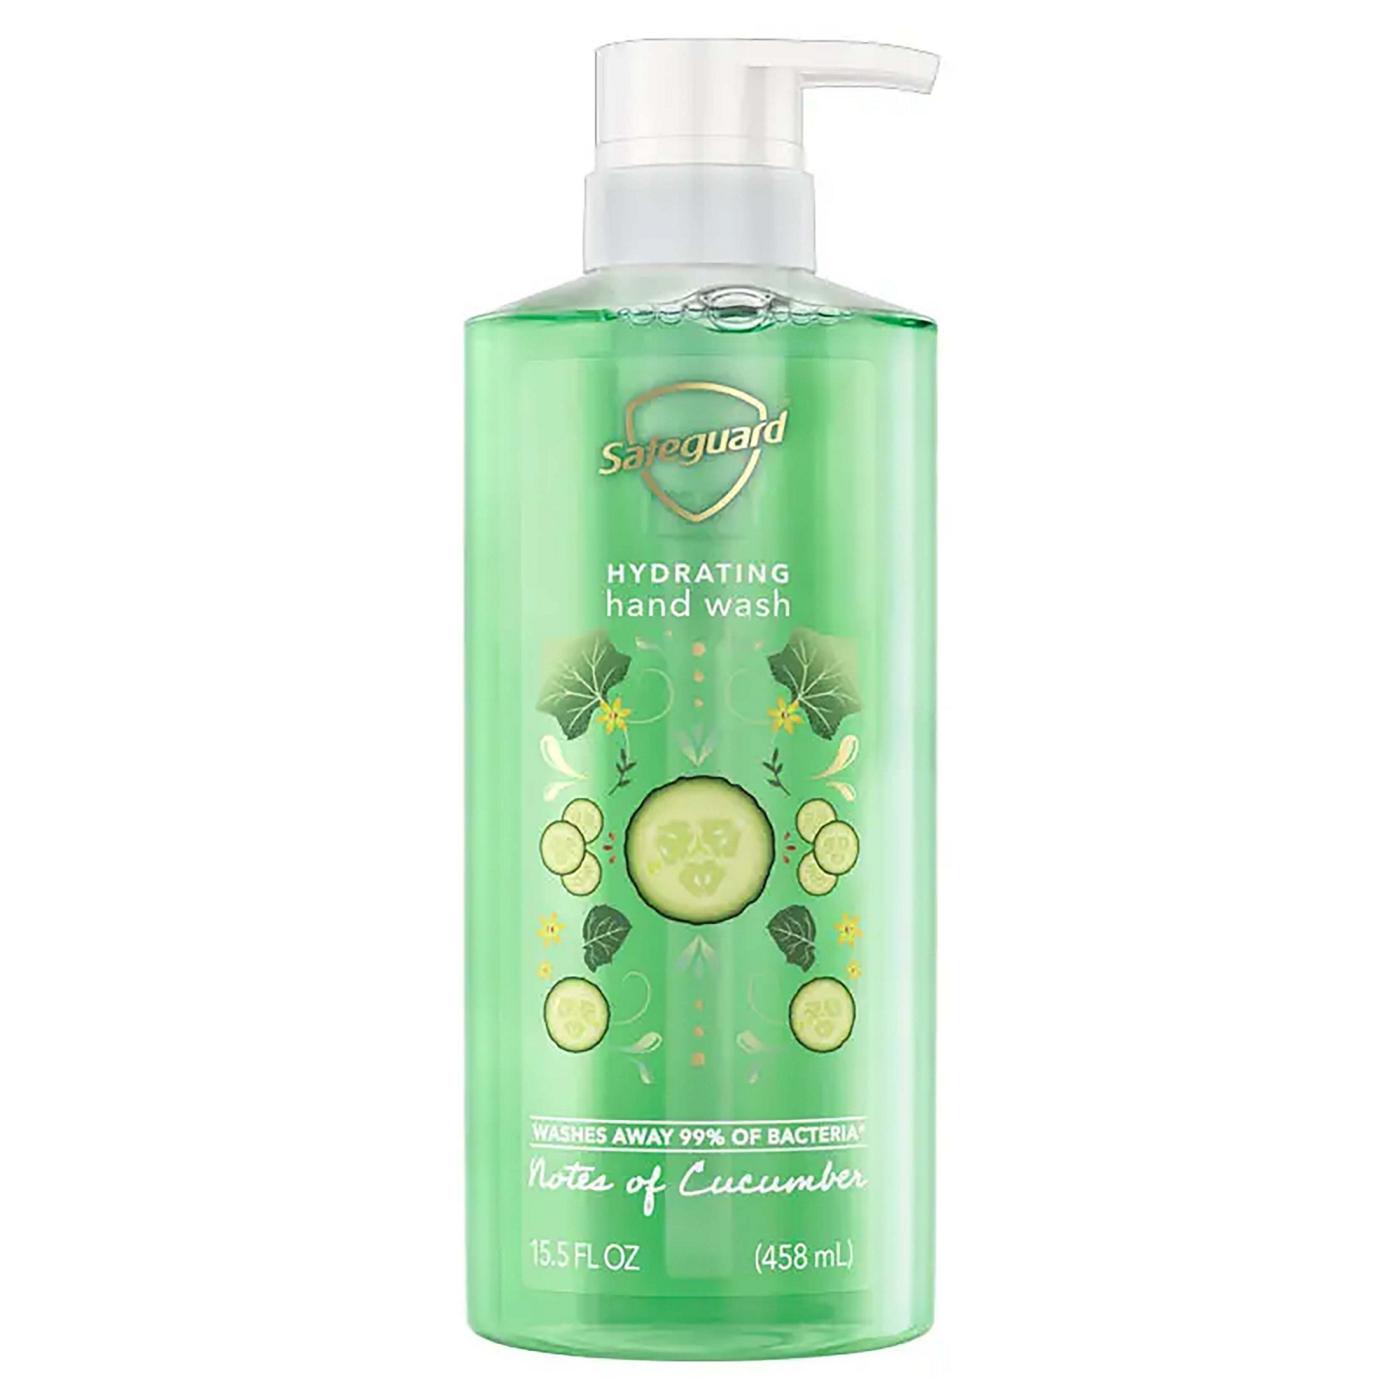 Safeguard Hydrating Hand Wash - Cucumber Water; image 1 of 2